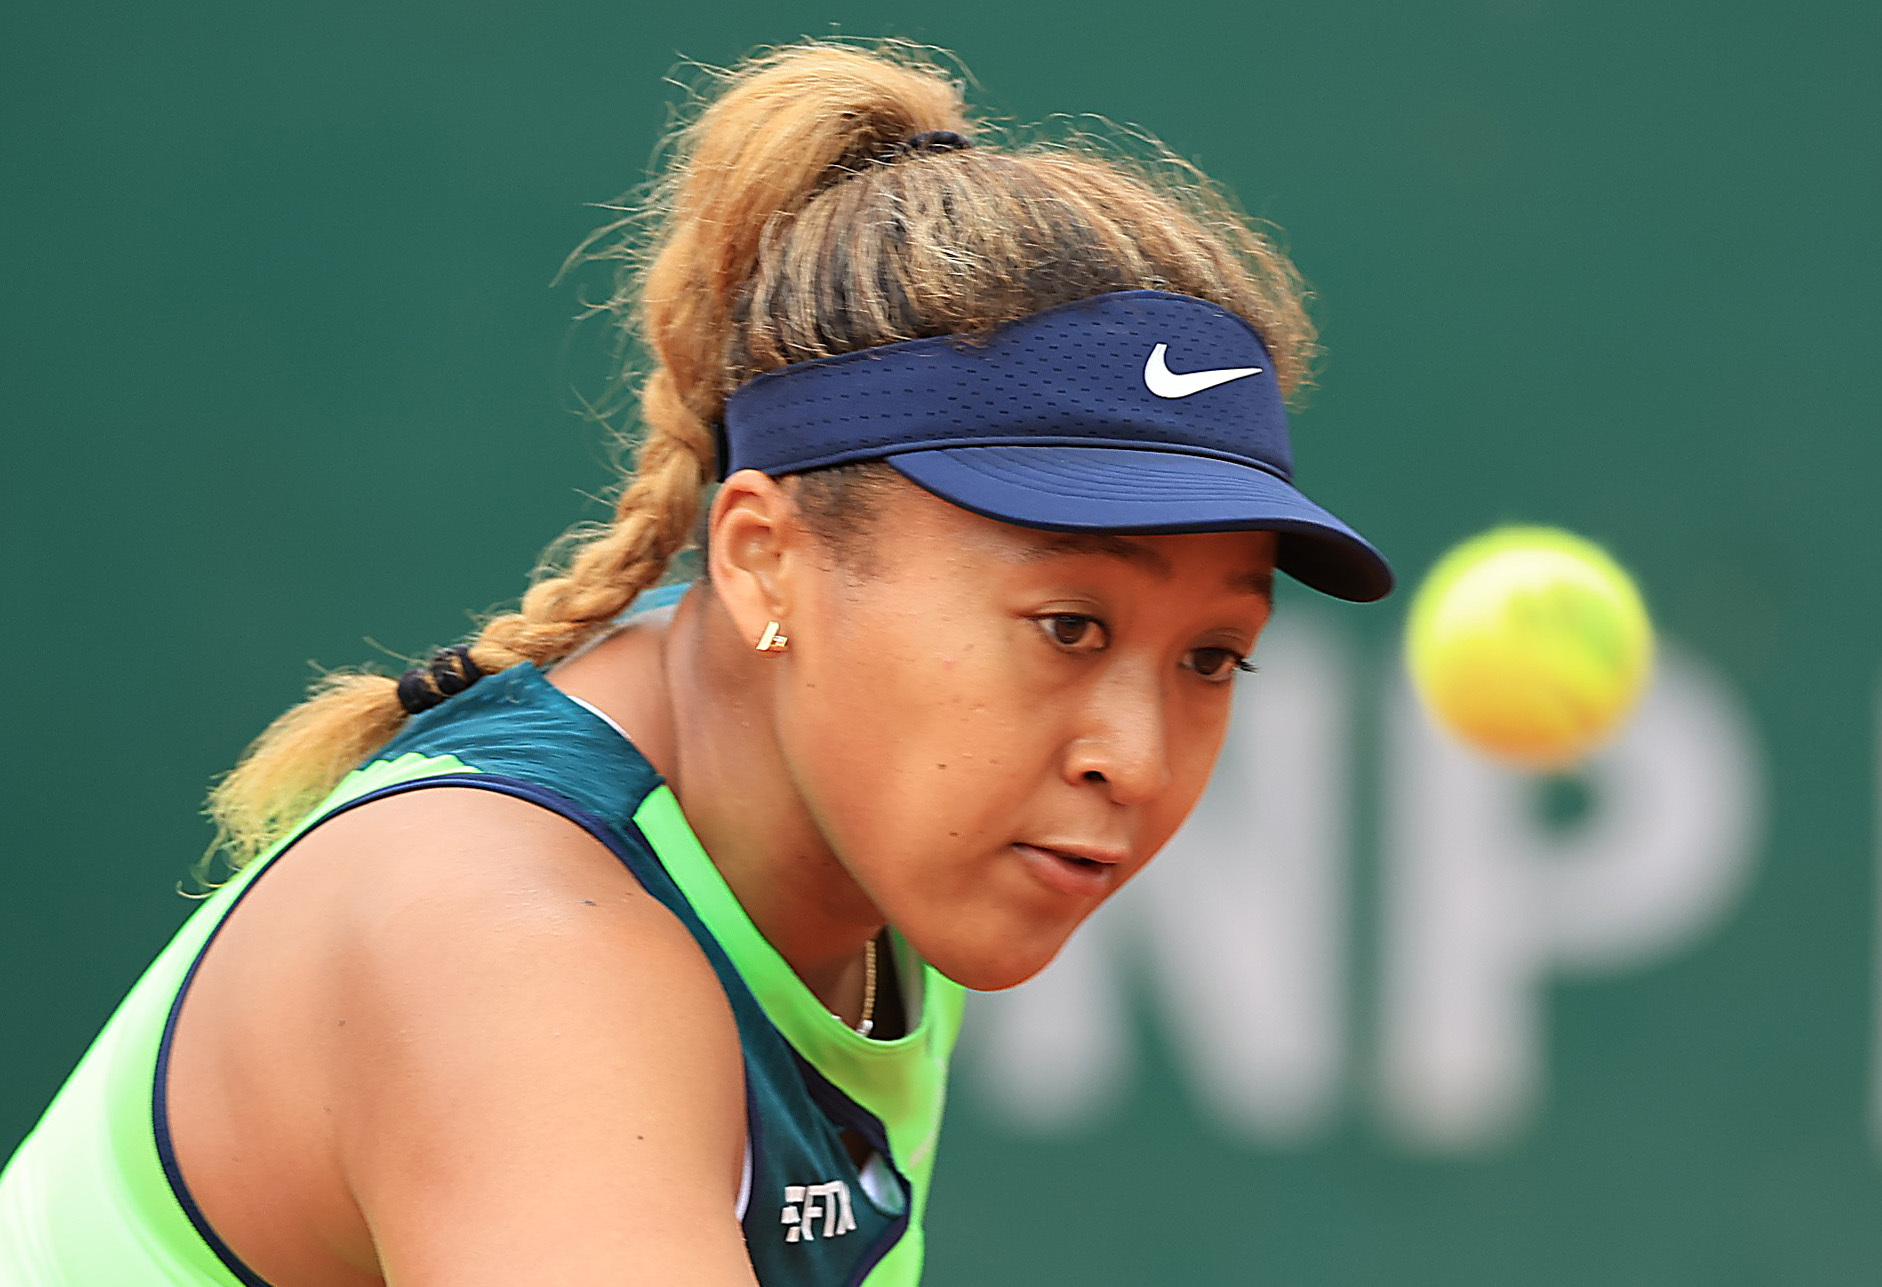 Japan's Naomi Osaka in action during her first round match against Amanda Anisimova of the U.S.